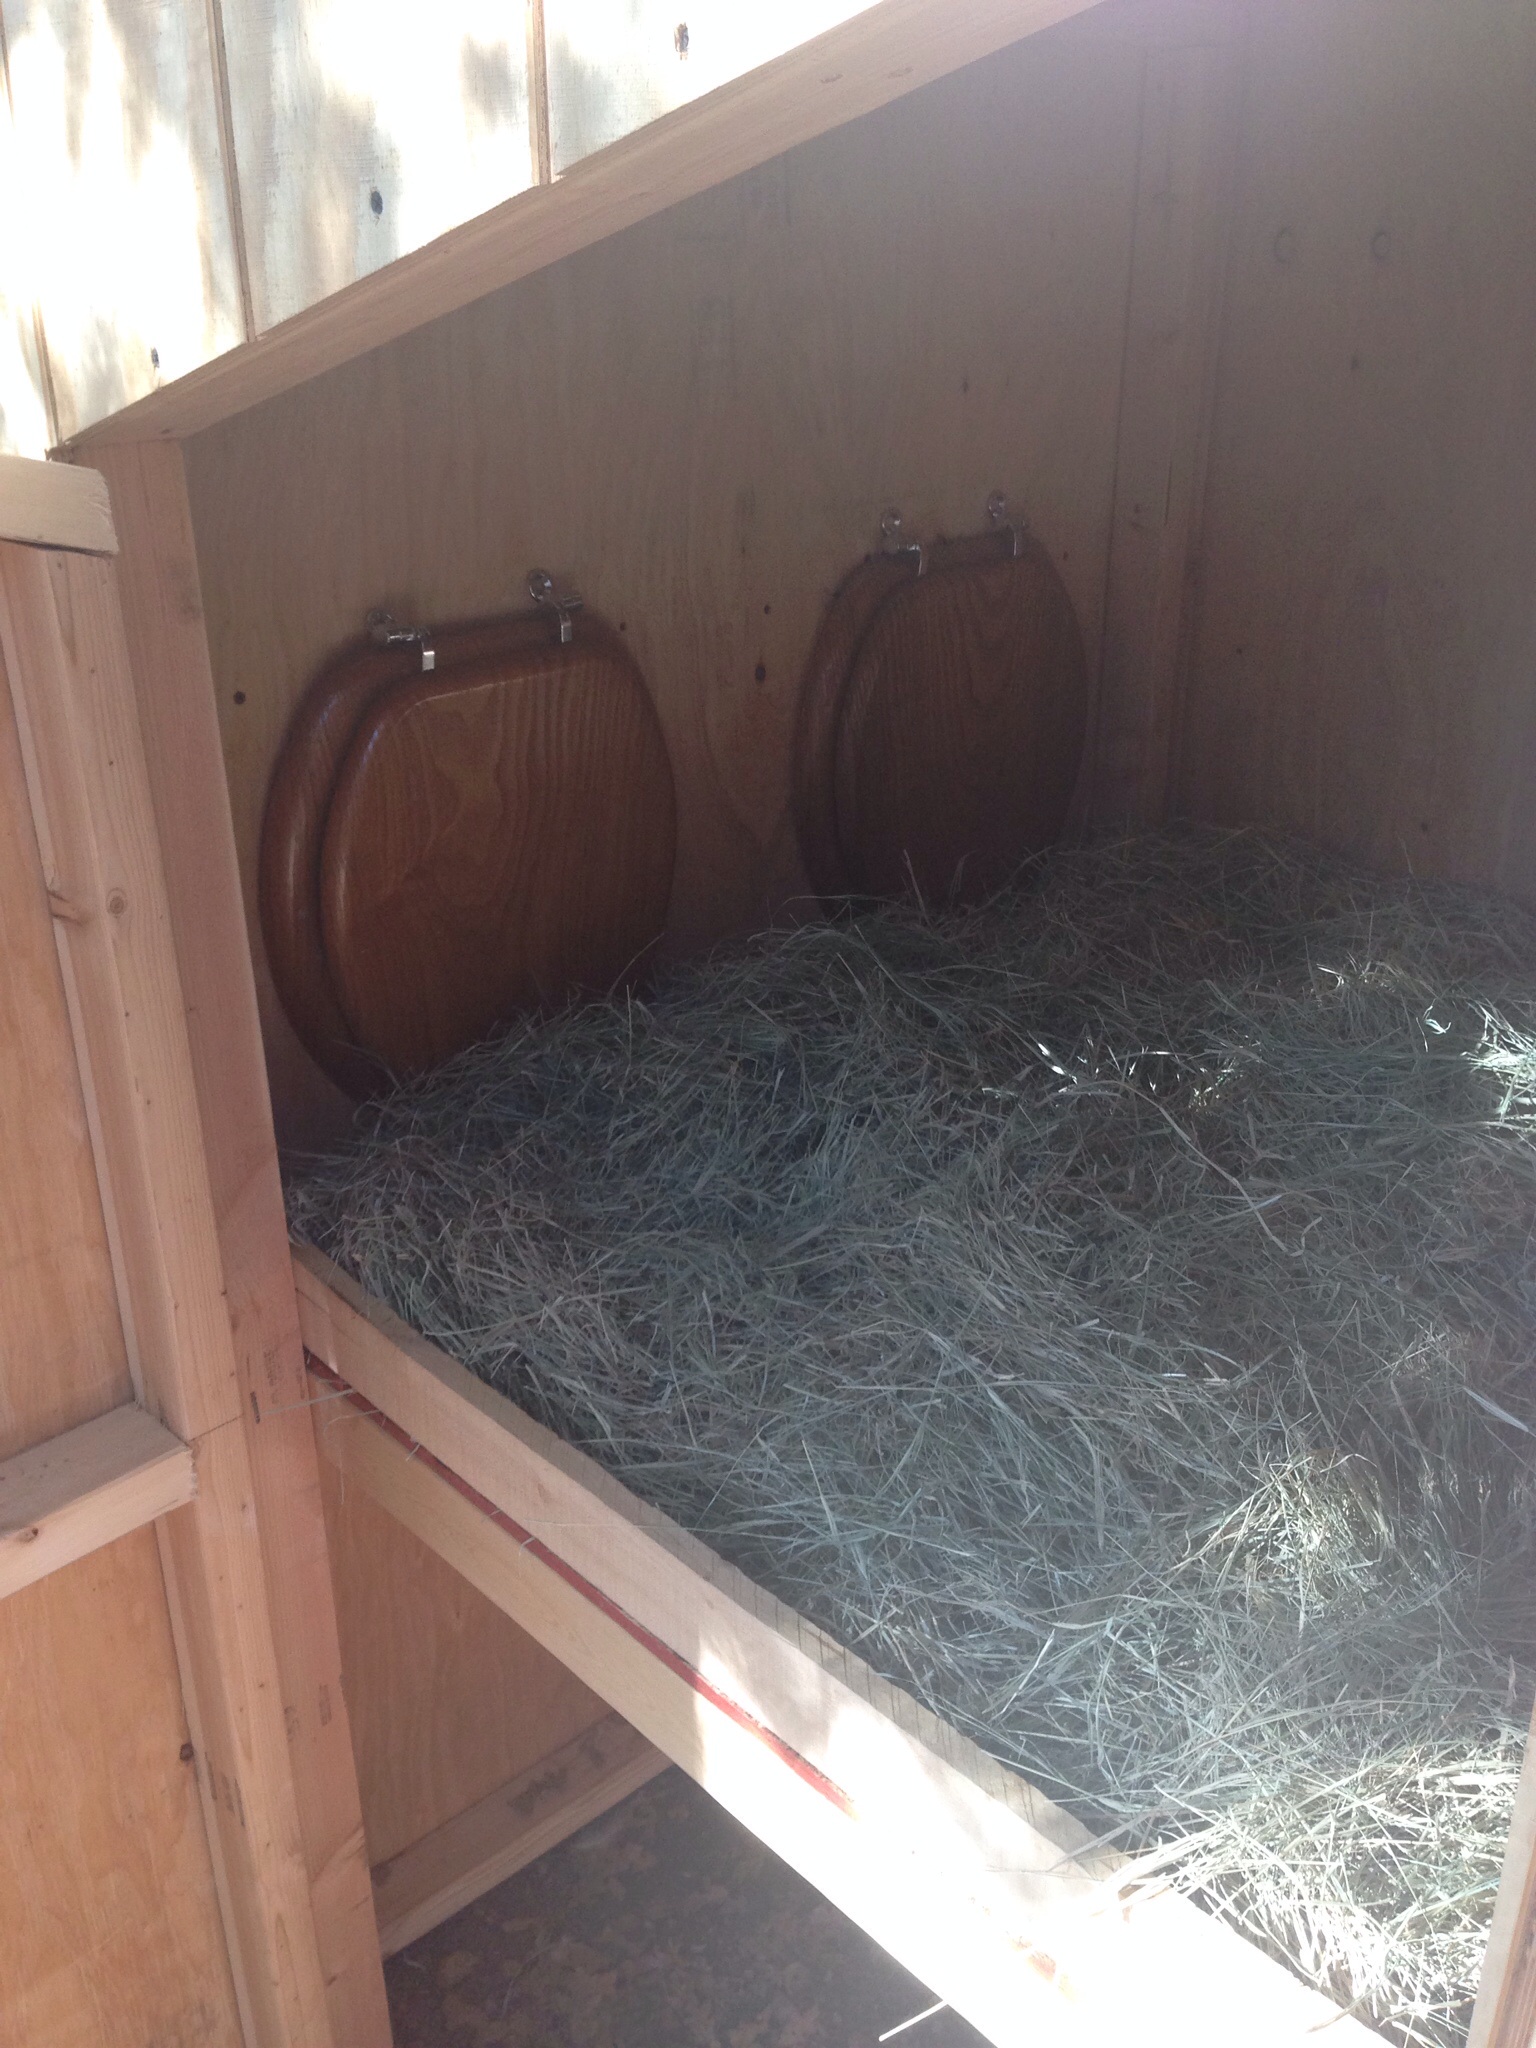 Bedding on top of  poultry dust.